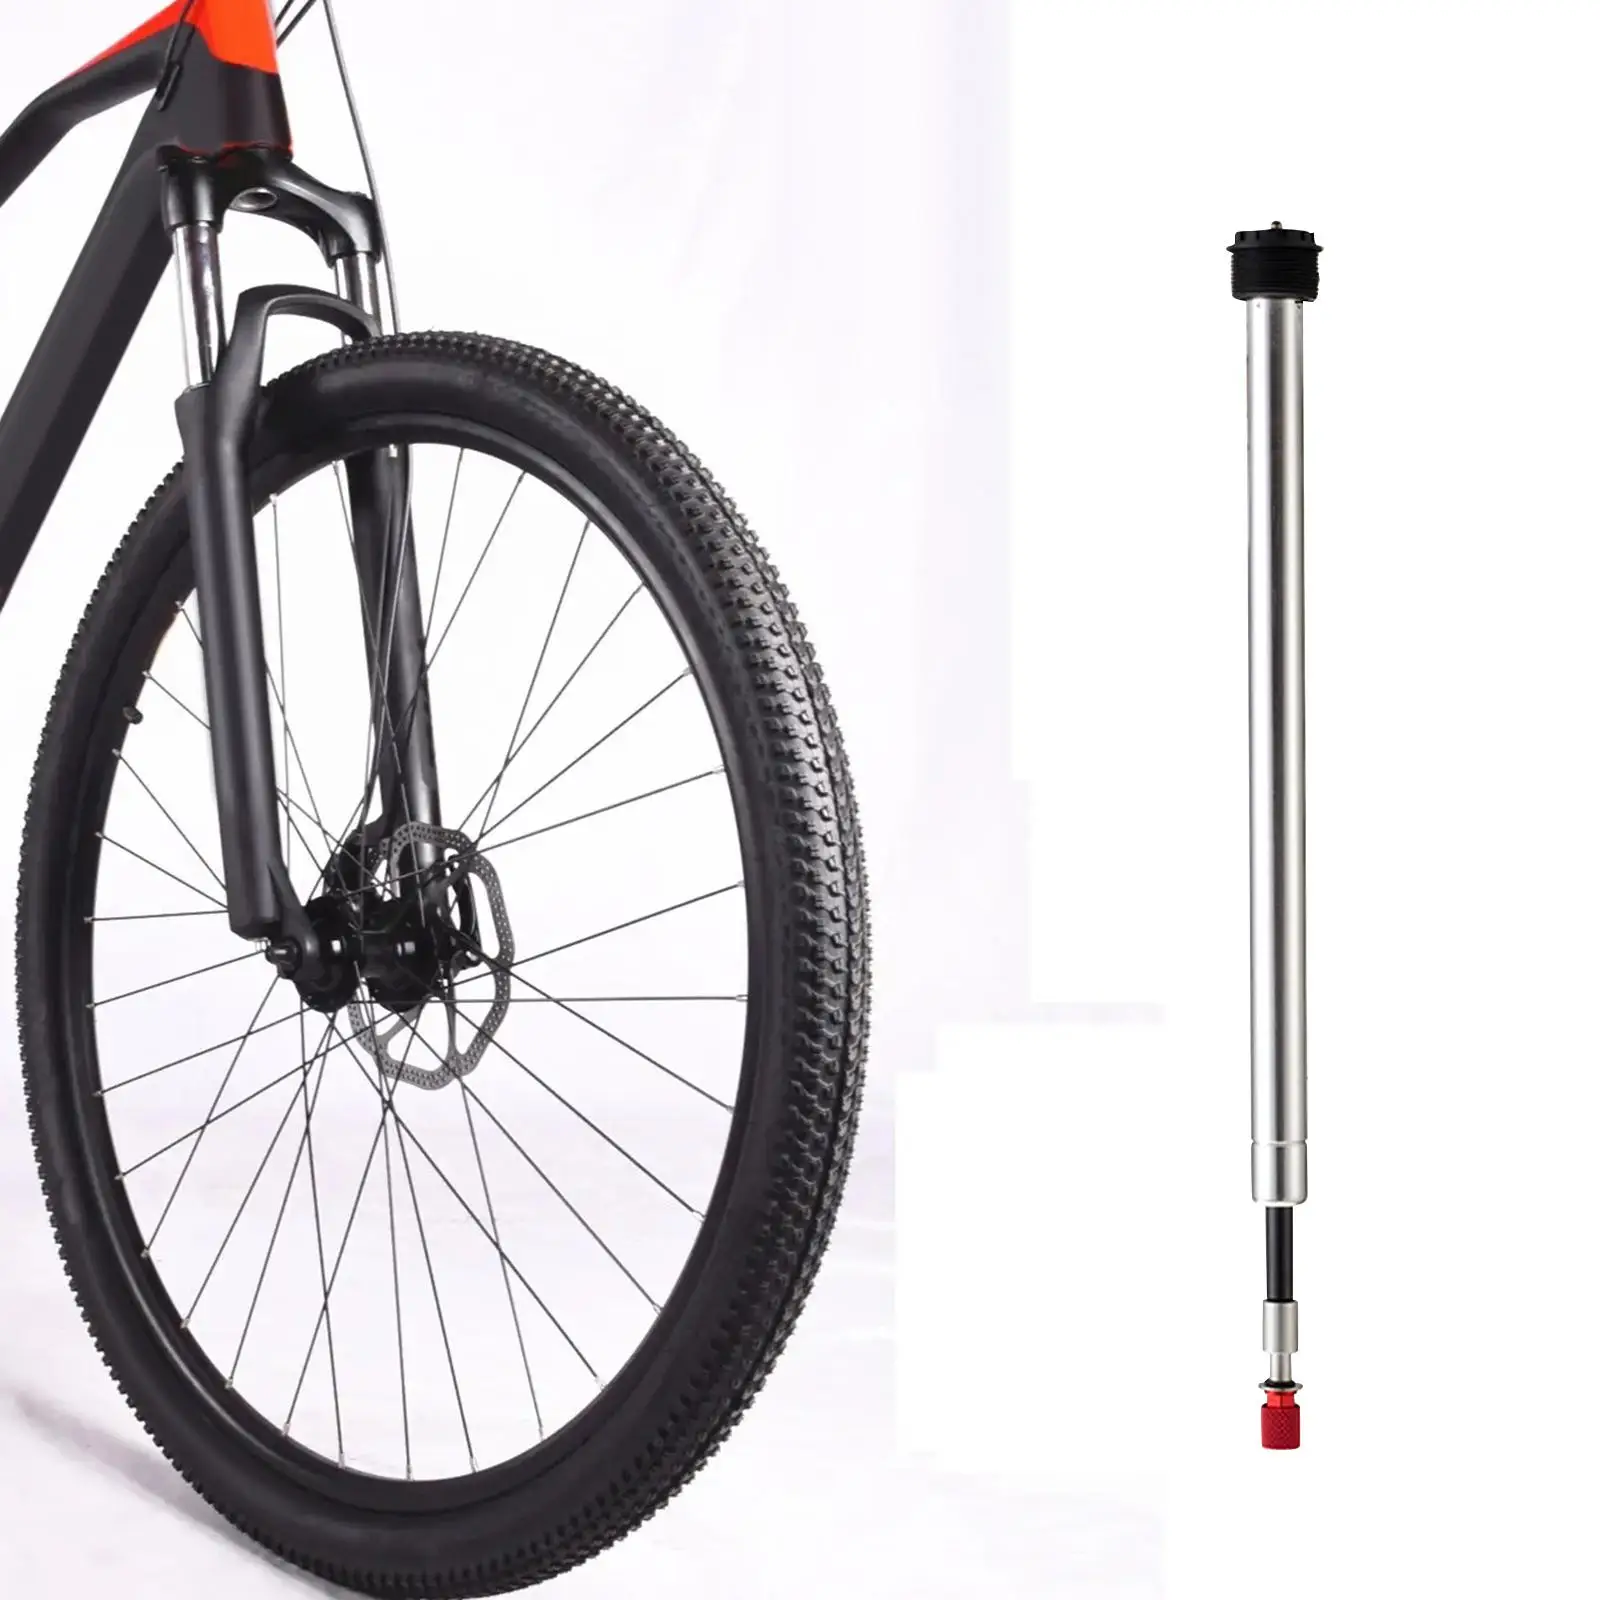 Bicycle Front Fork Repair Rod Replacement Durable Accessory 34mm Bike Fork Repair Parts Air Pneumatic Rod for Mountain Bike